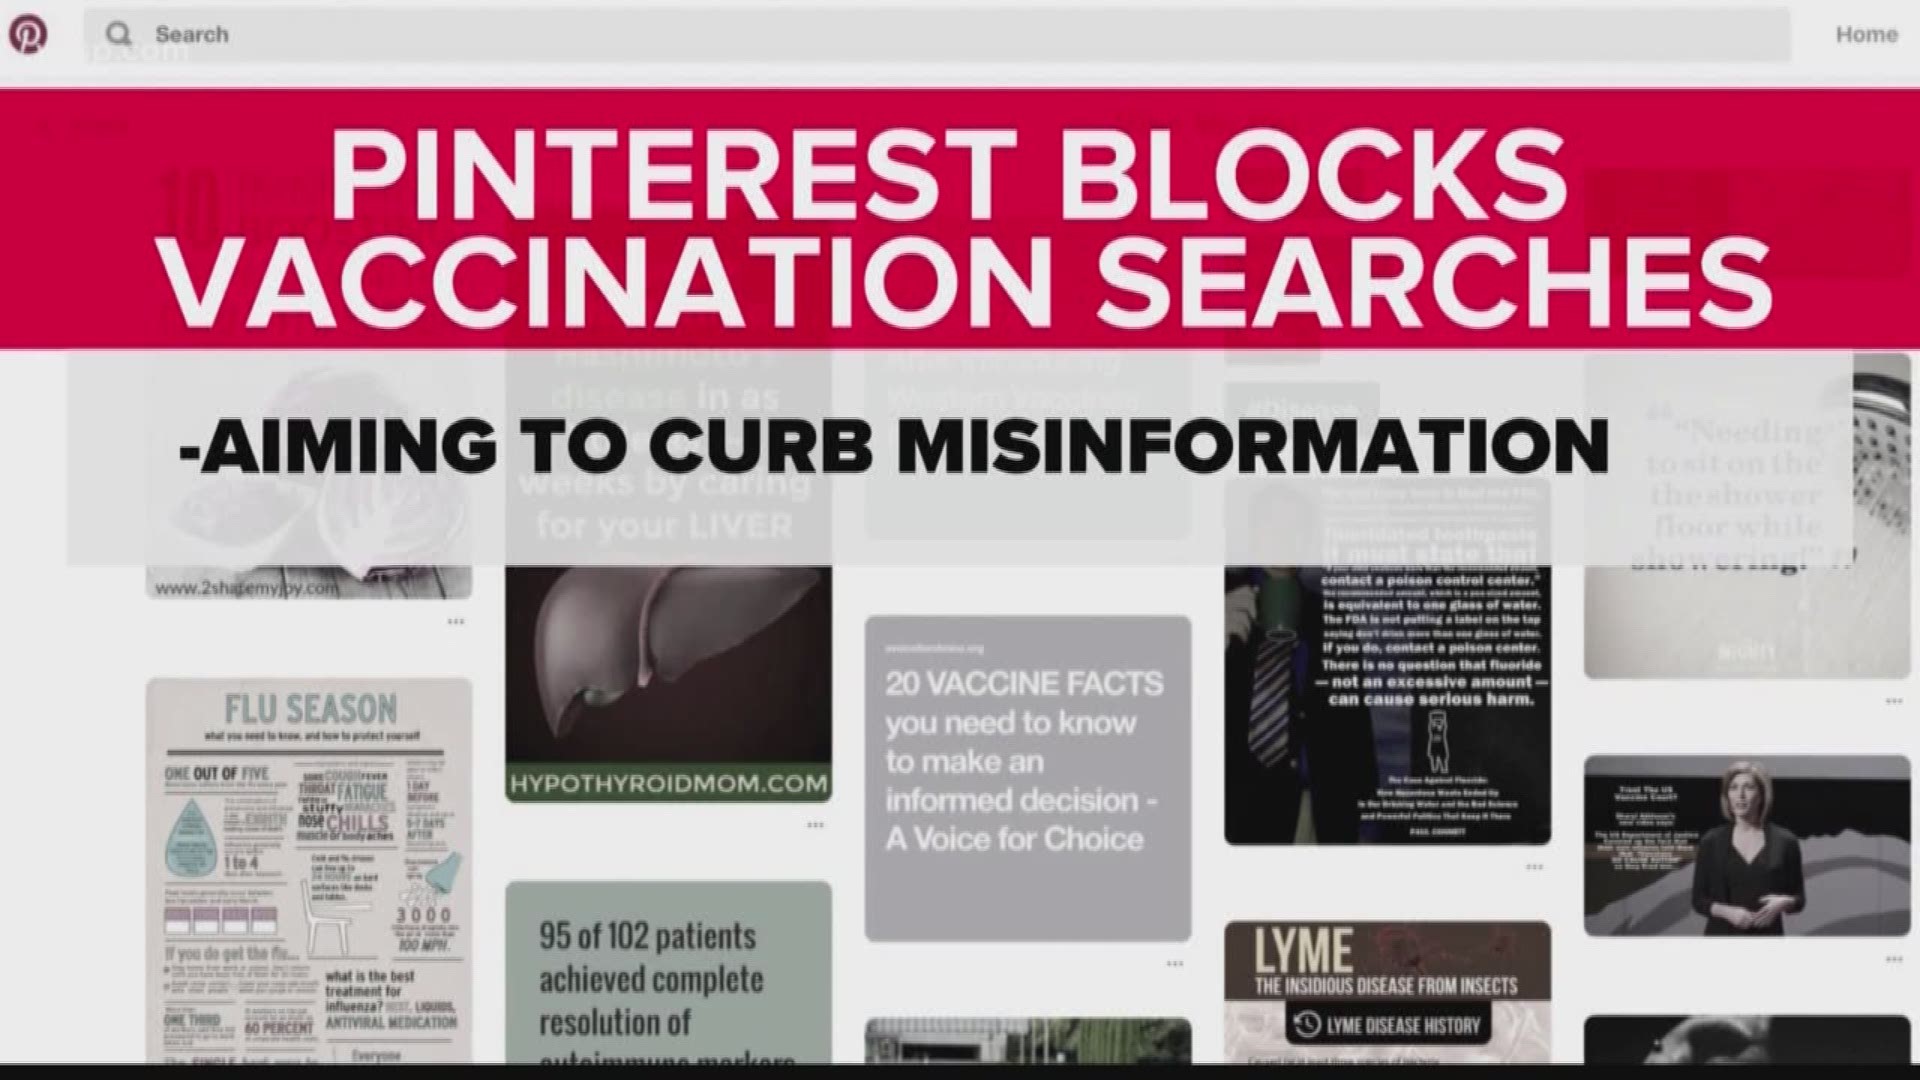 Pinterest said it tried to take down only anti-vaccine content but couldn’t, so the company took it a step further.